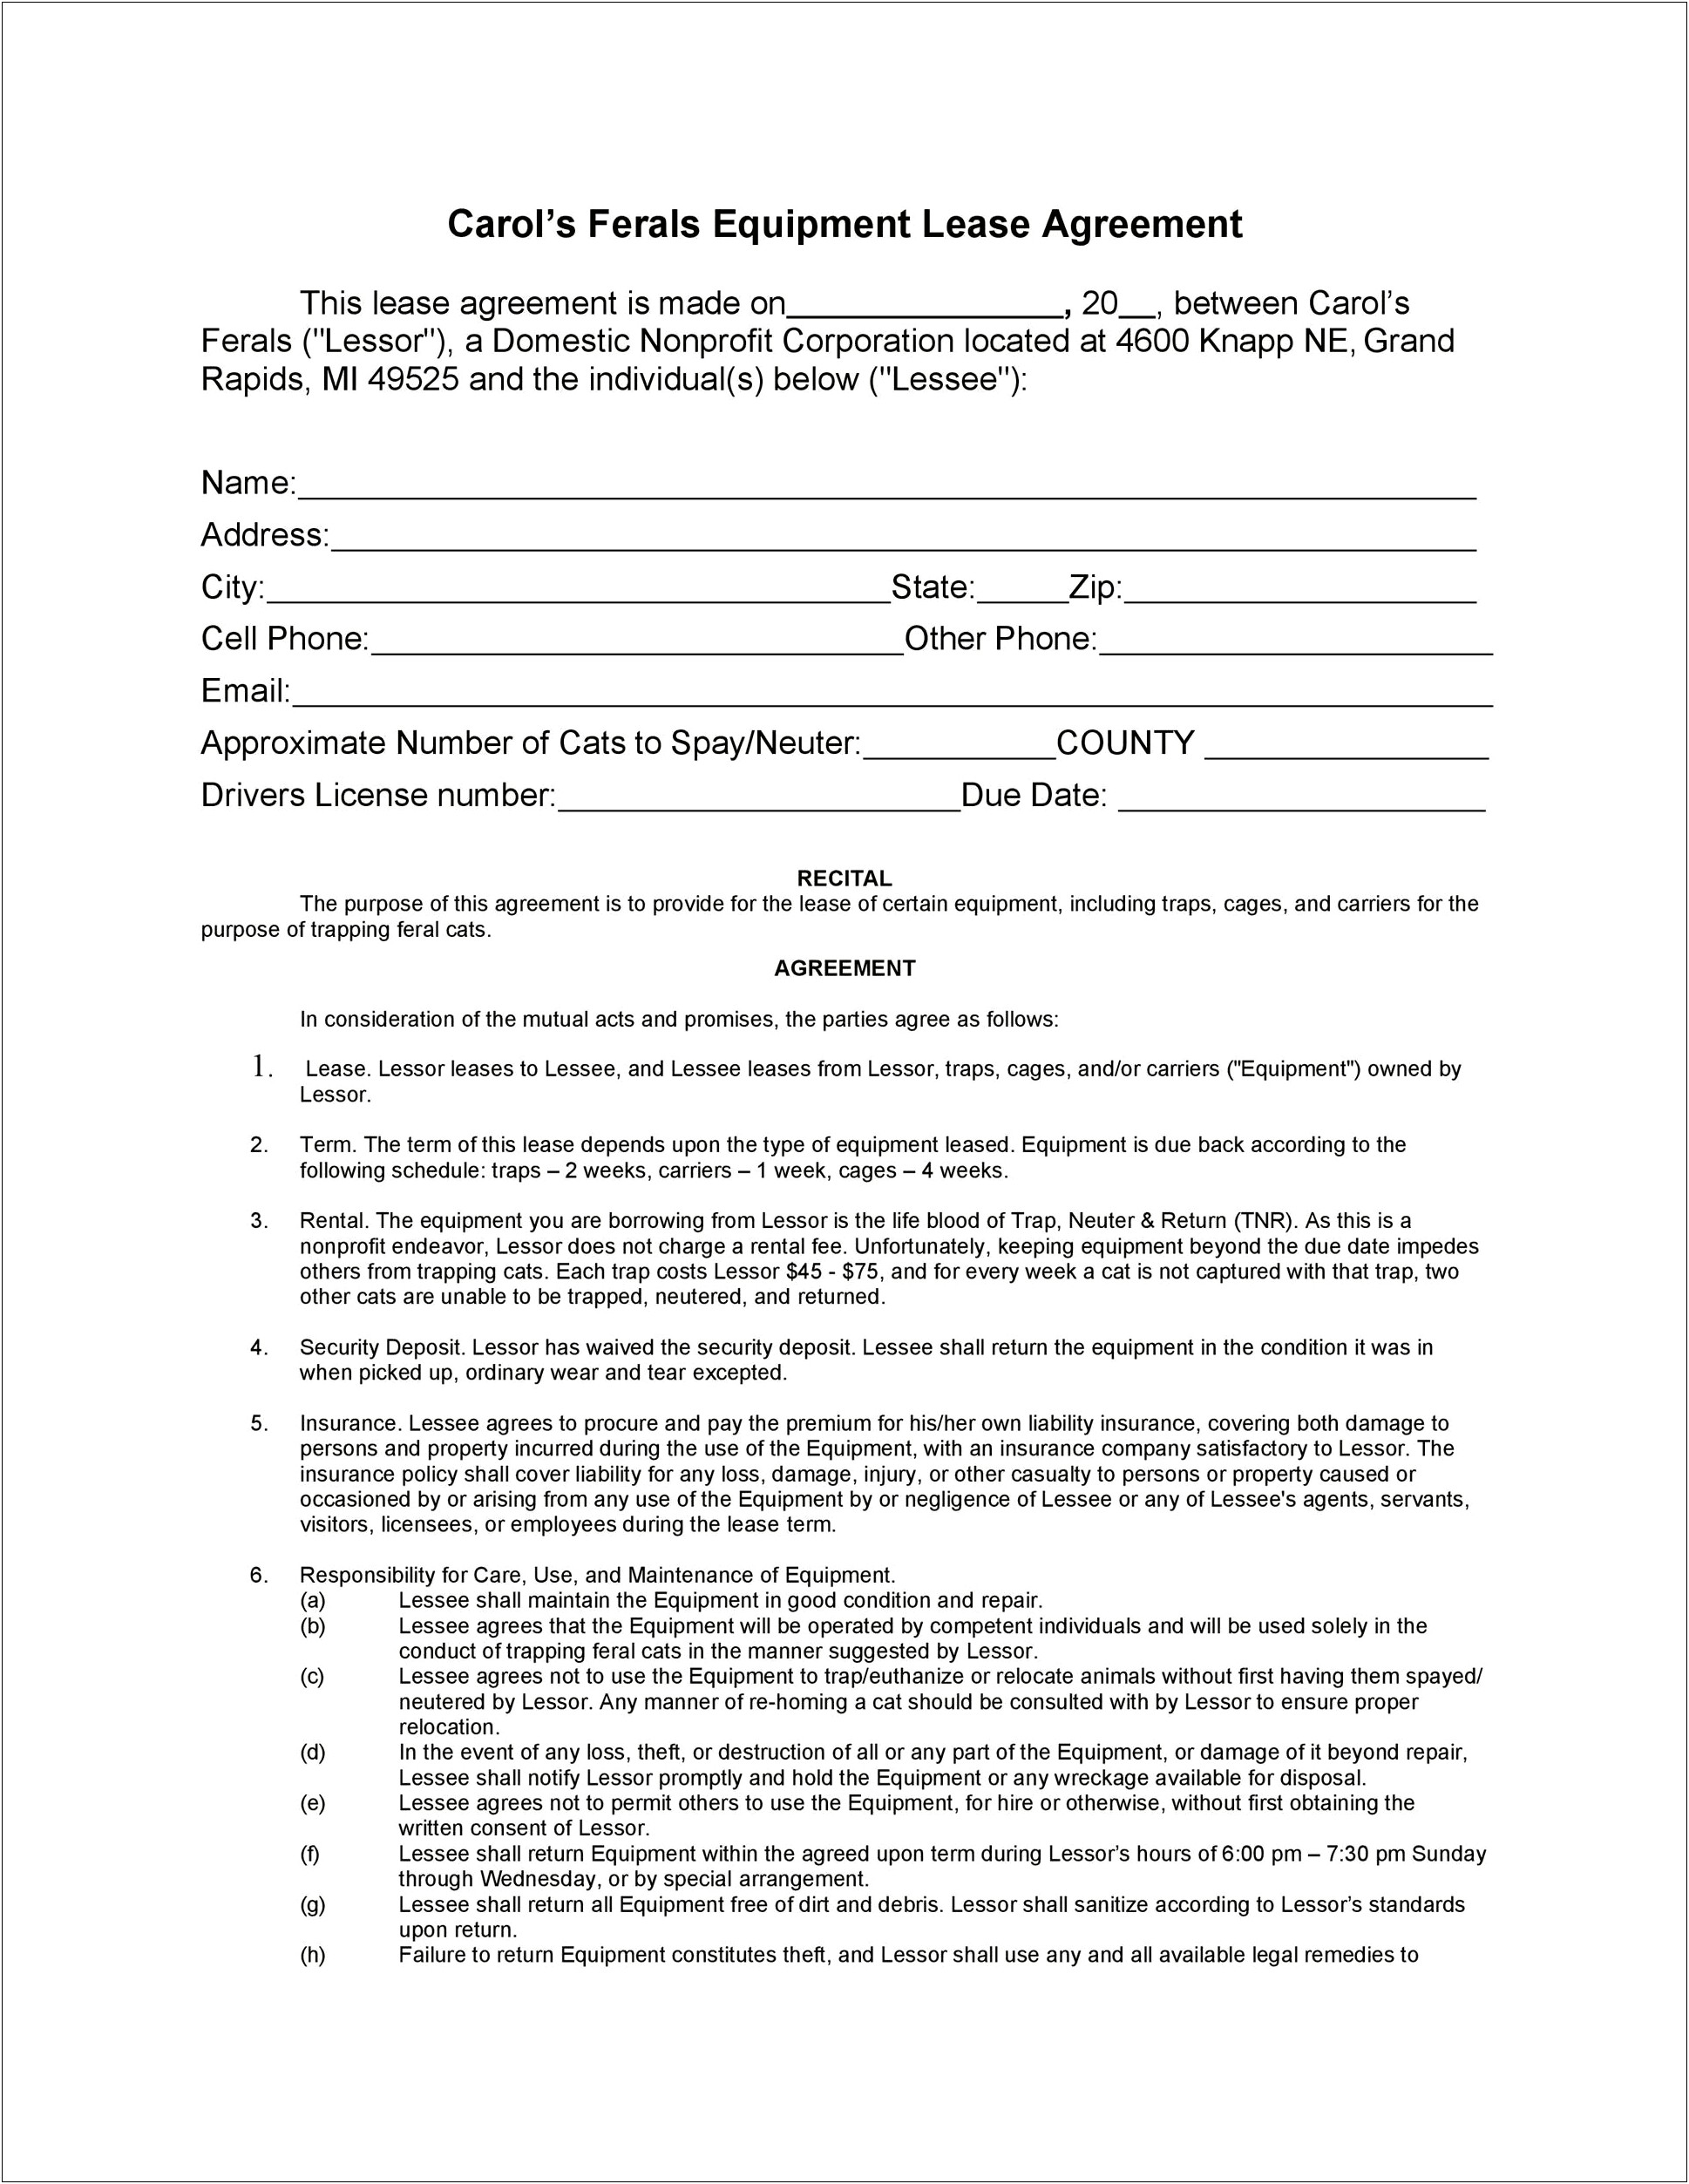 Equipment Rental Agreement Template Free South Africa